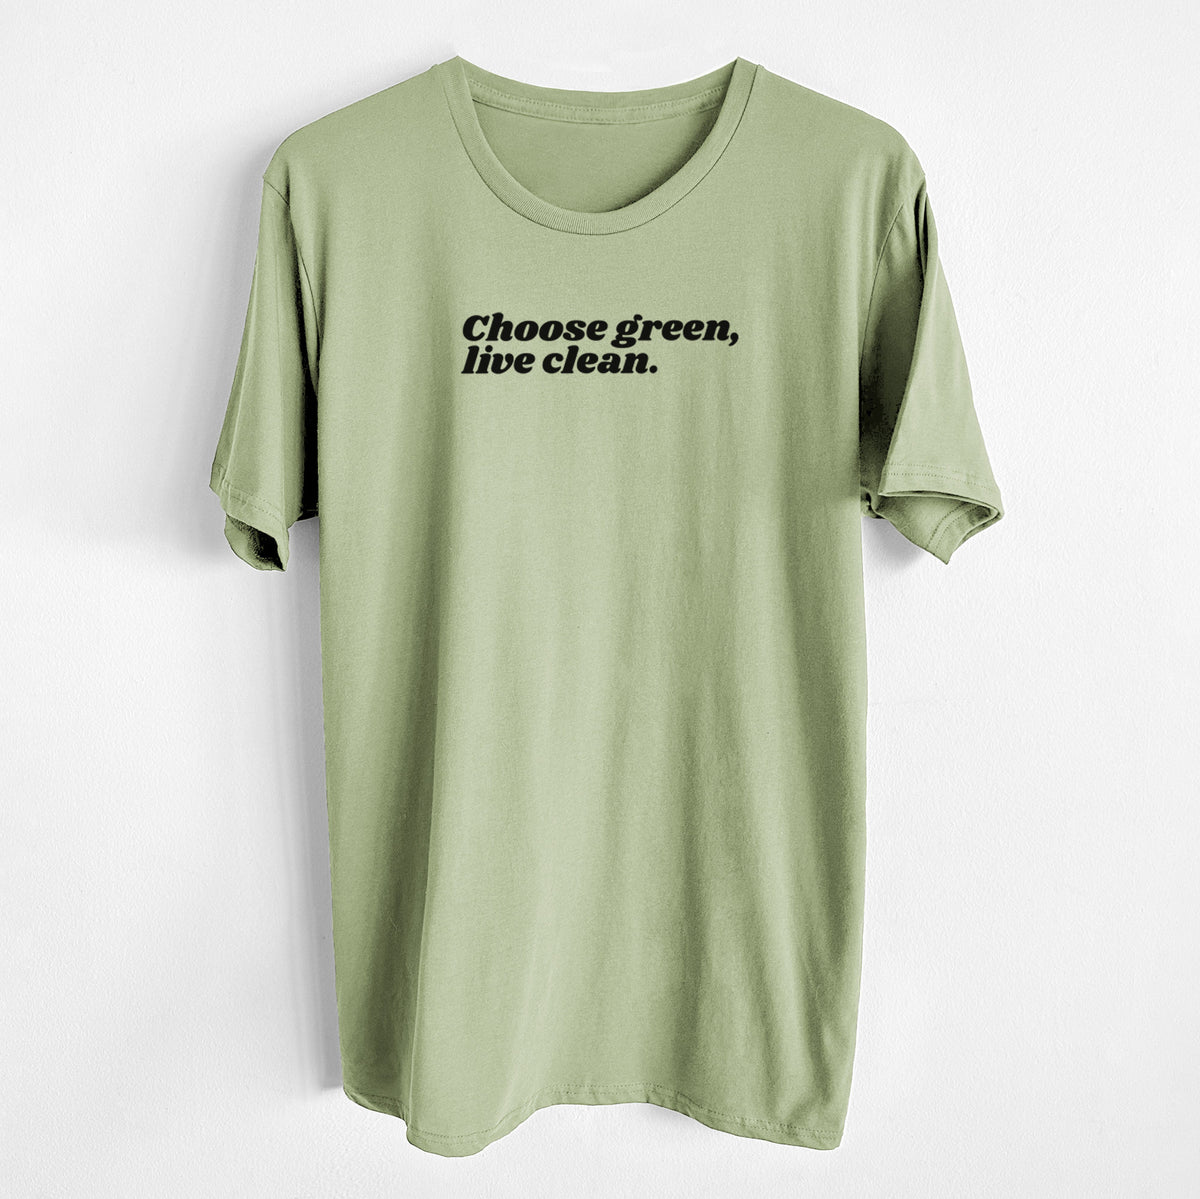 Choose Green, Live Clean - Unisex Crewneck - Made in USA - 100% Organic Cotton